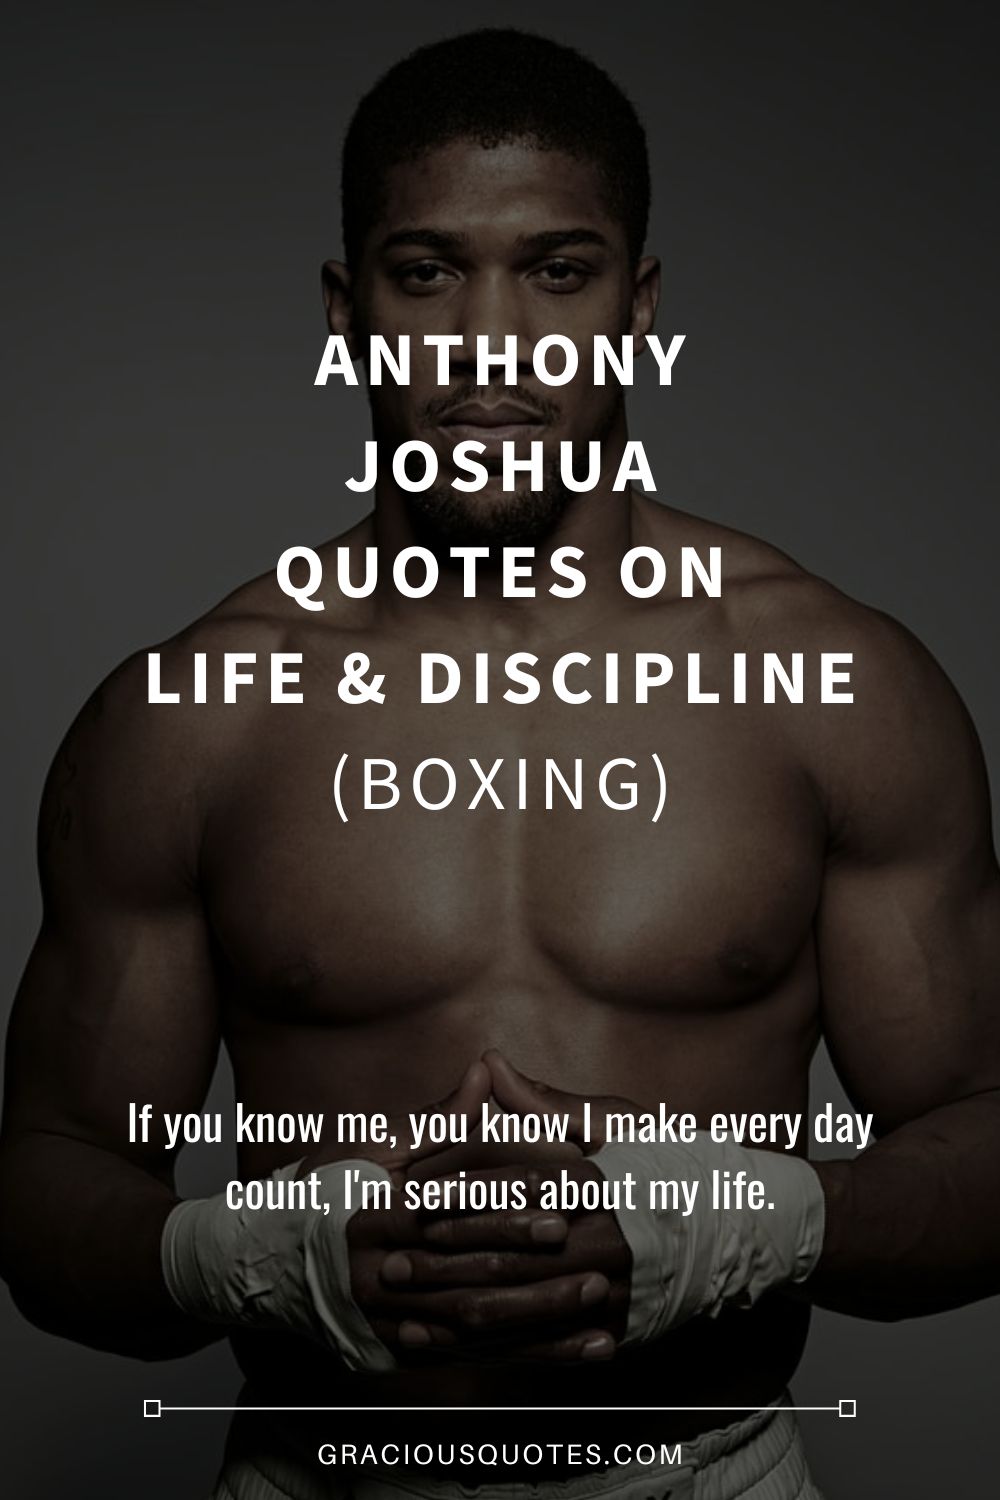 Anthony Joshua Quotes on Life & Discipline (BOXING) - Gracious Quotes